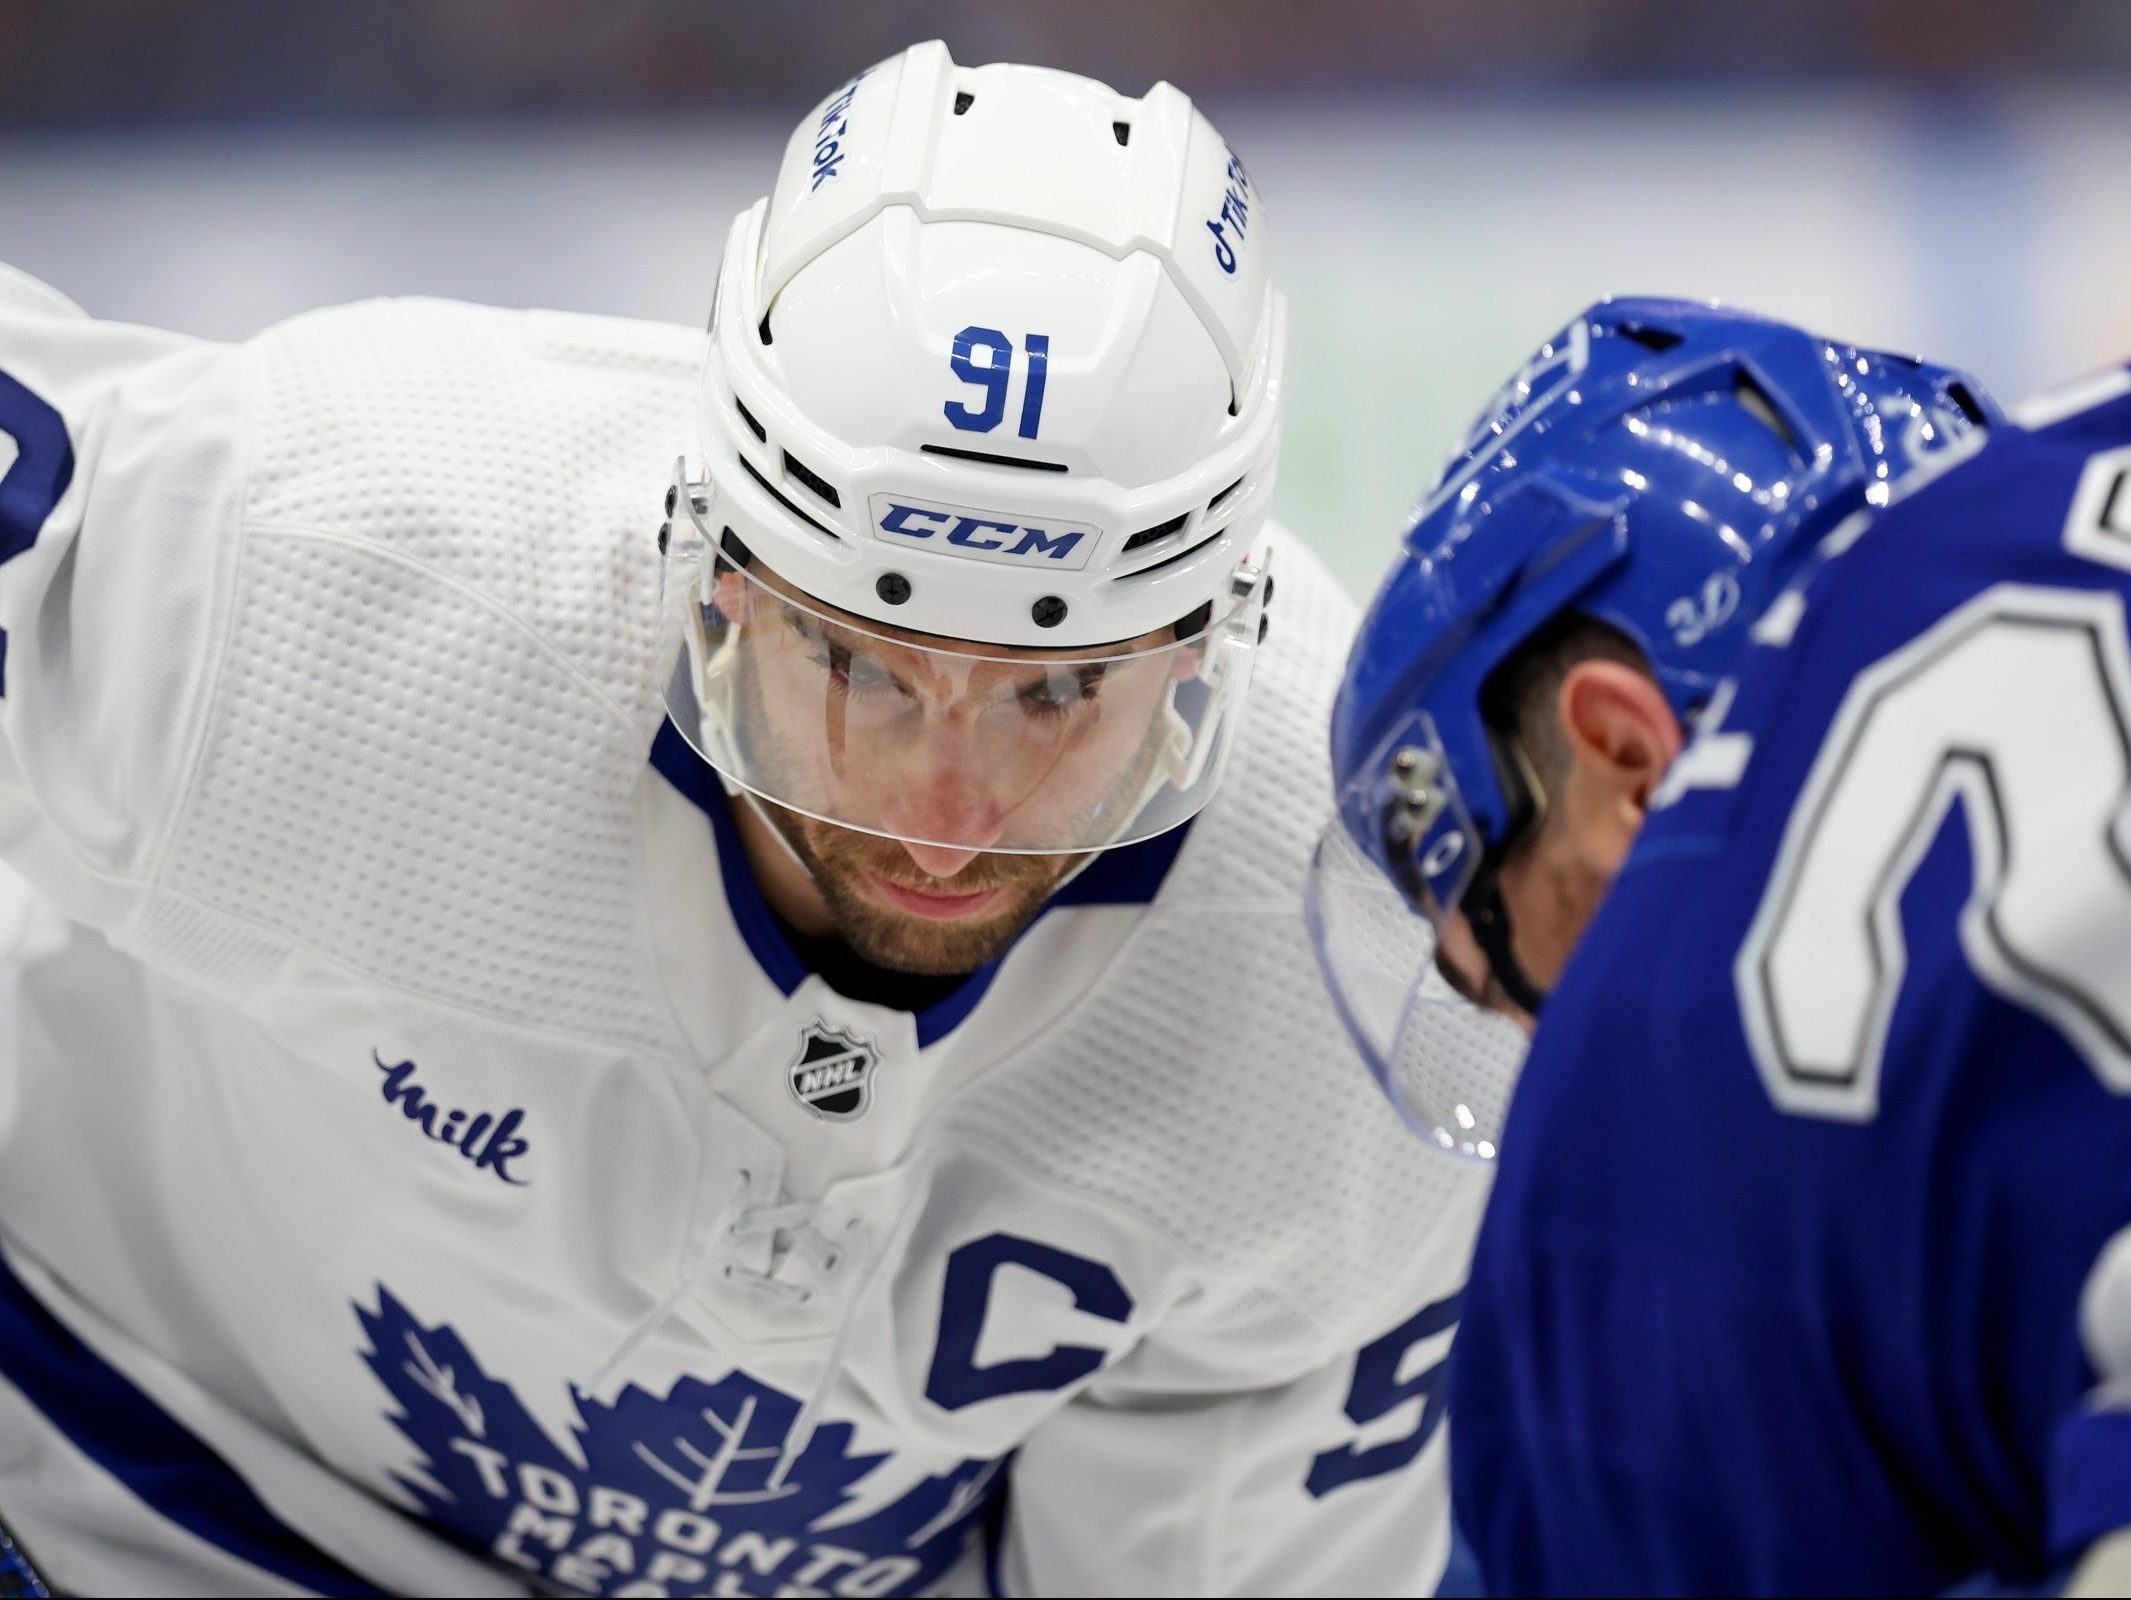 Here's how the Maple Leafs' opening-night lineup could look with